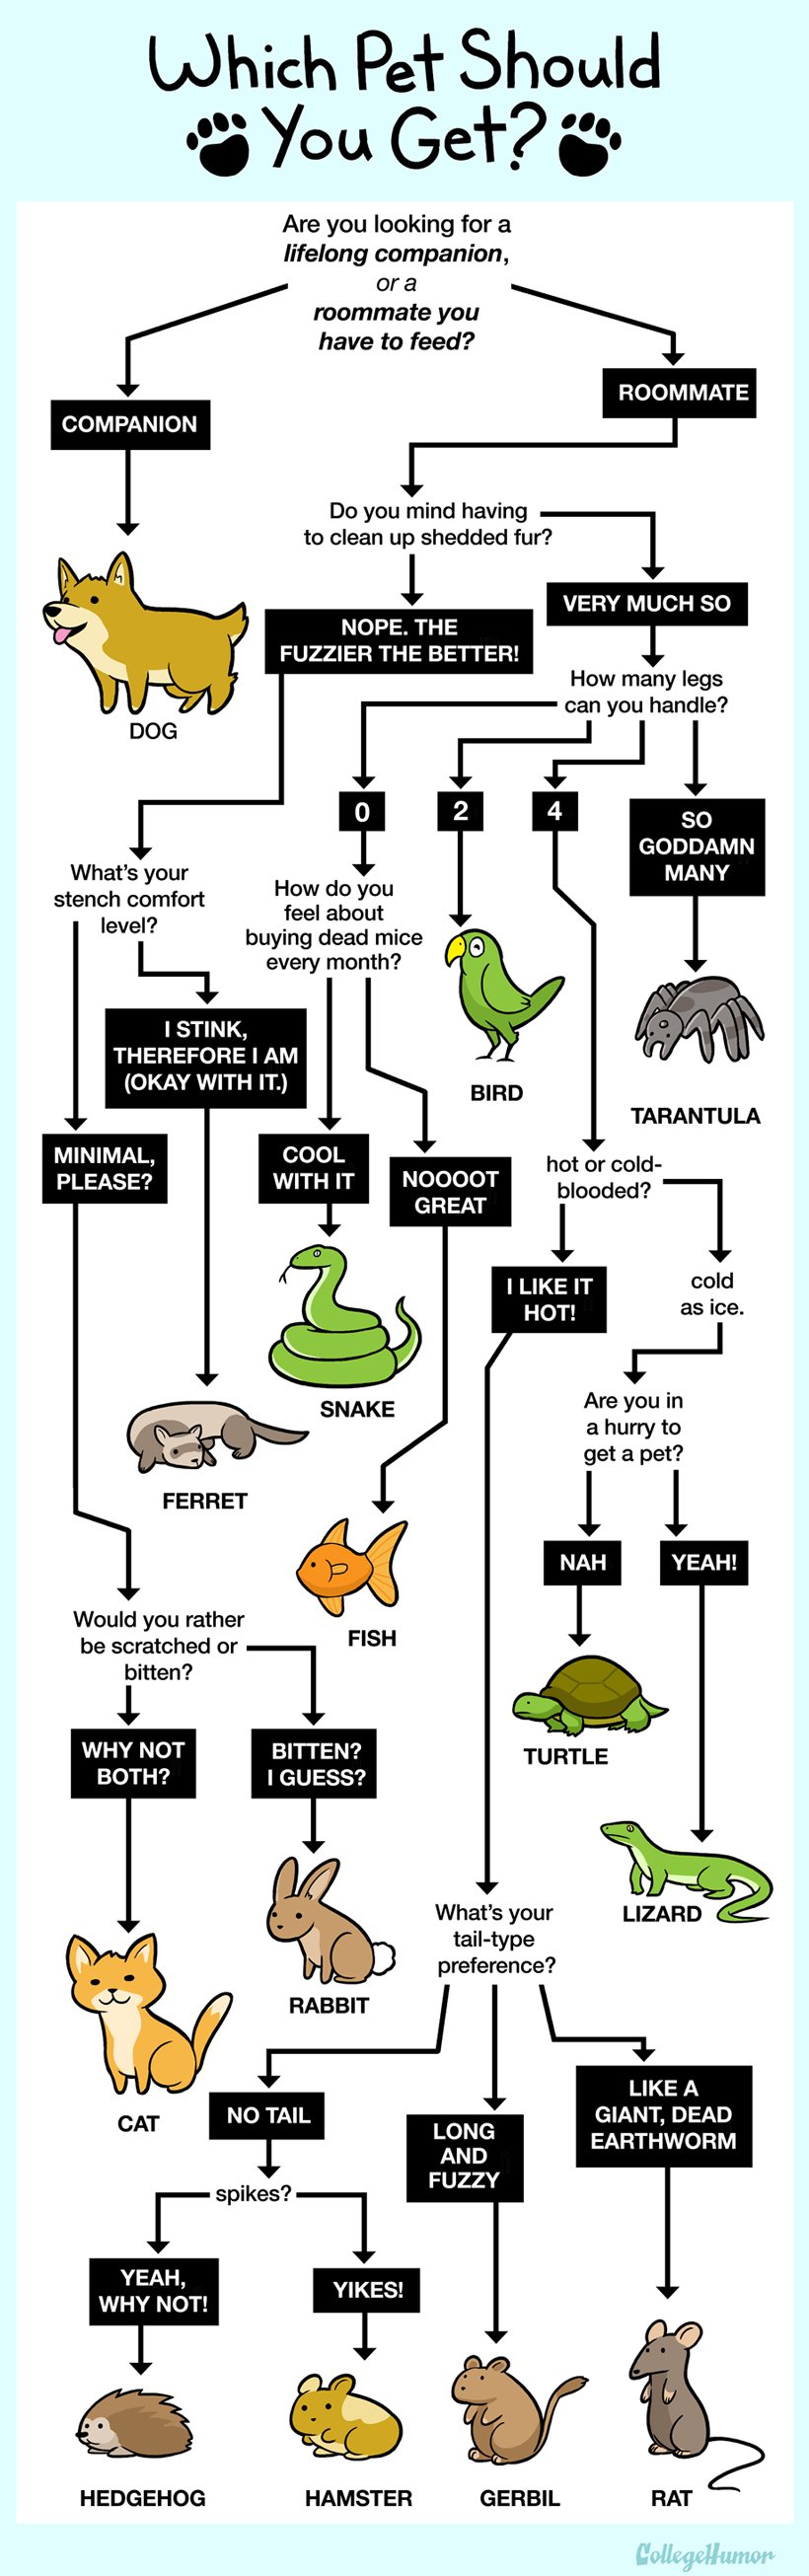 Which Pet Should You Get